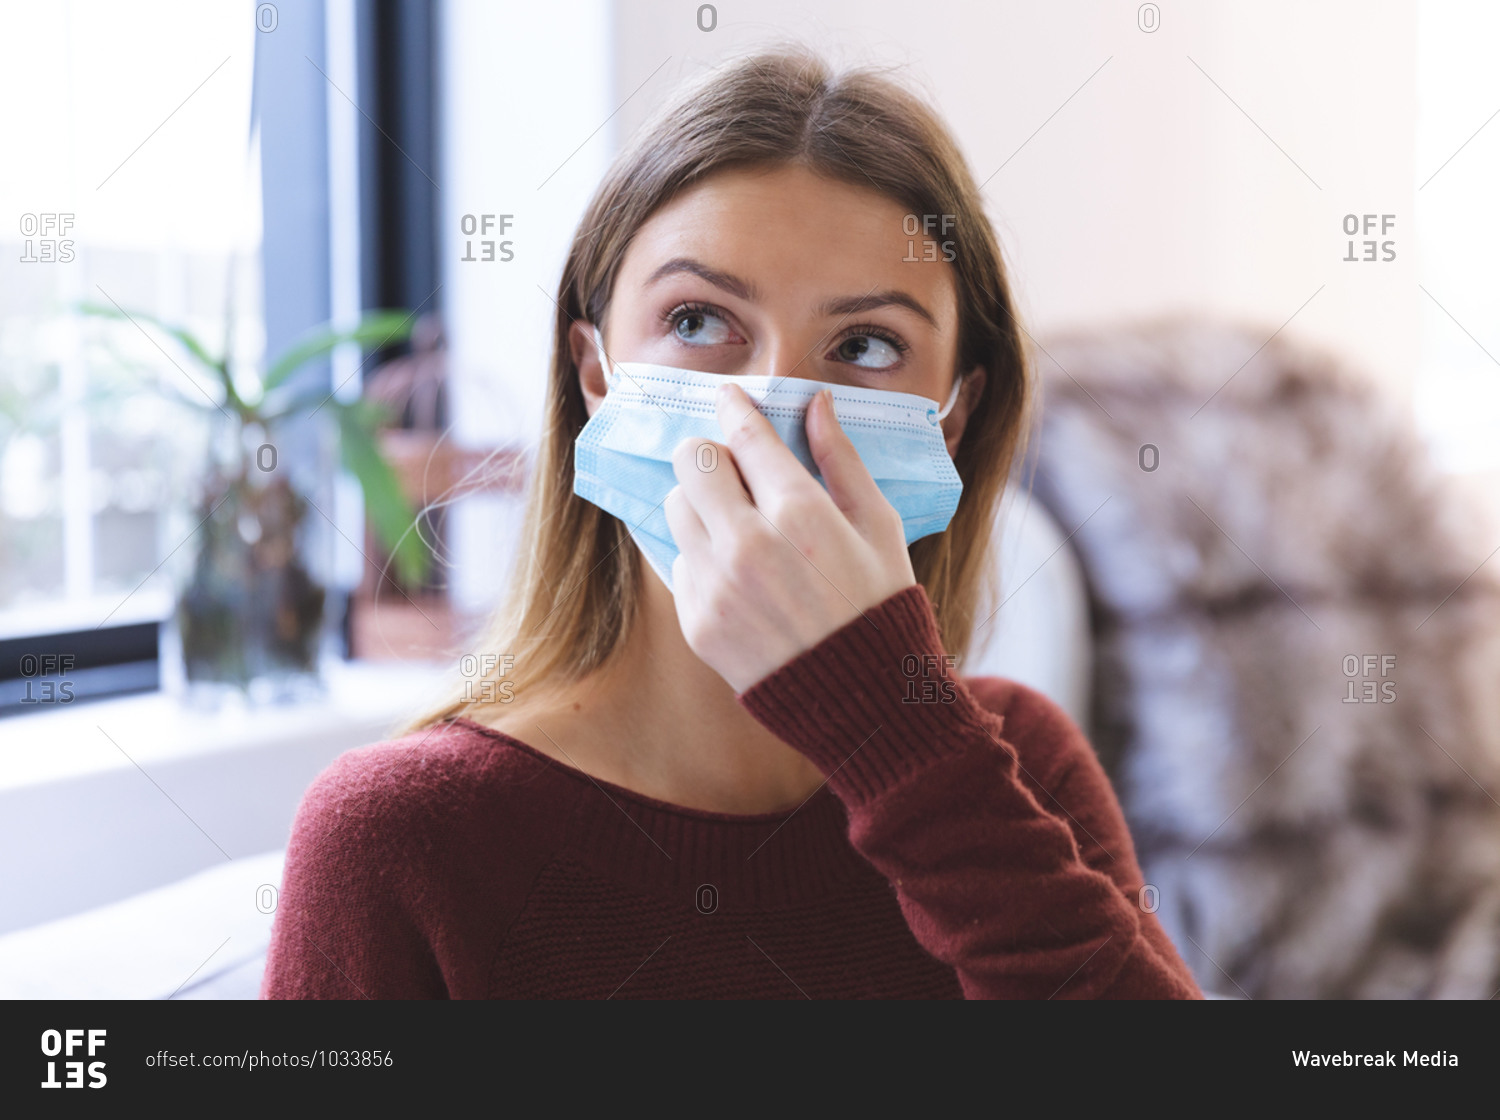 Caucasian woman spending time at home, sitting in living room, wearing face mask on. Social distancing during Covid 19 Coronavirus quarantine lockdown